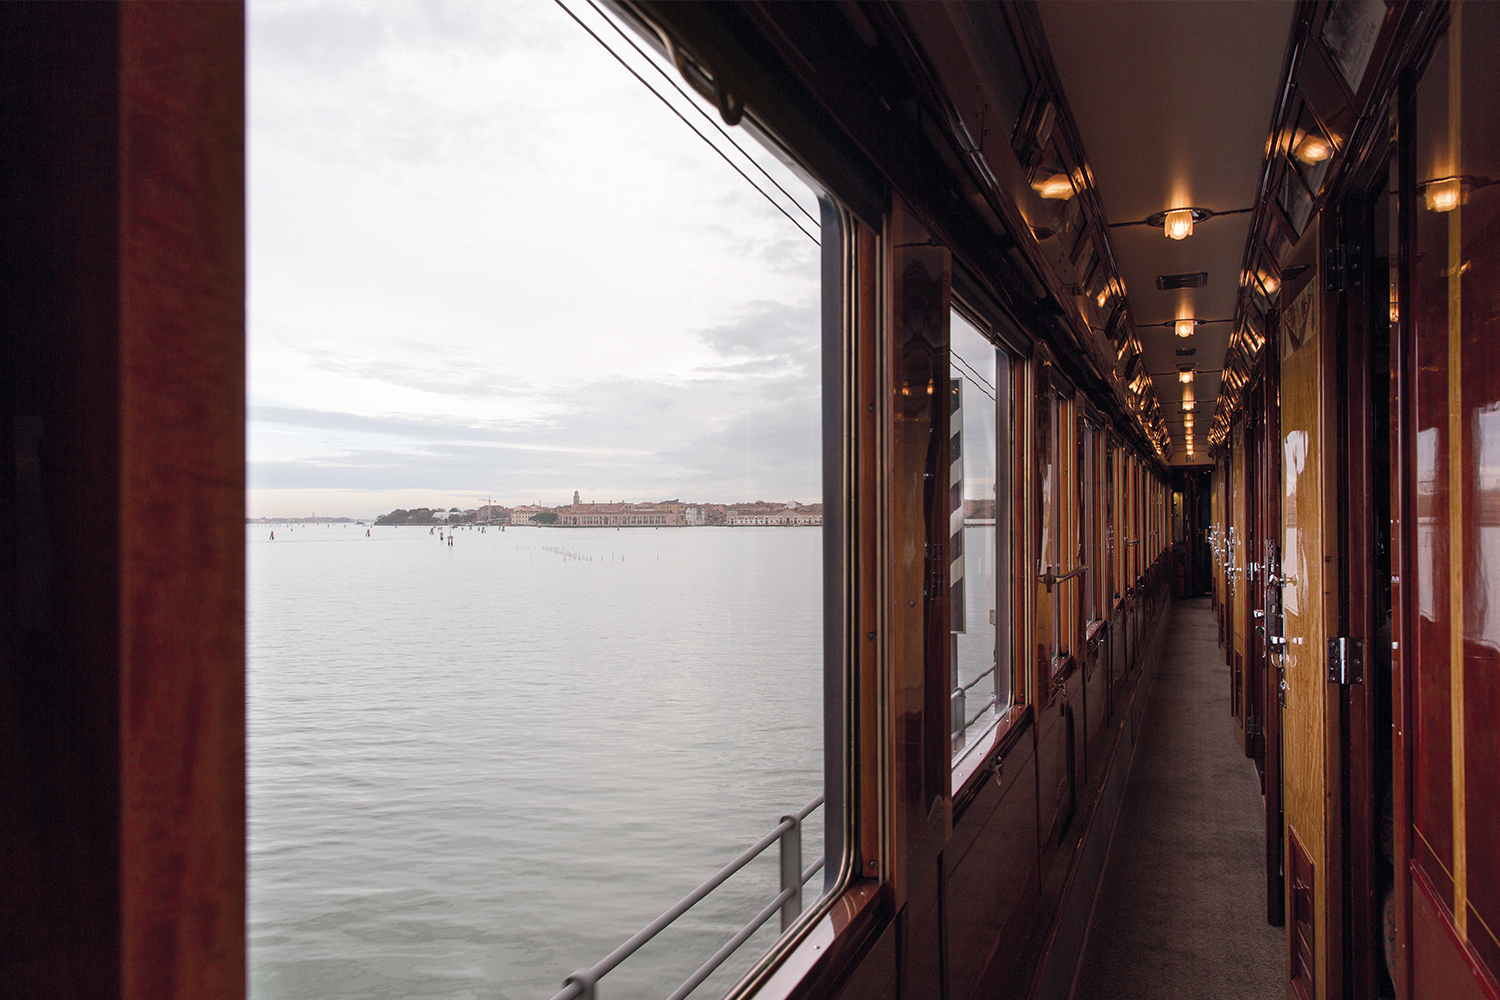 The view from the Venice Simplon-Orient-Express train